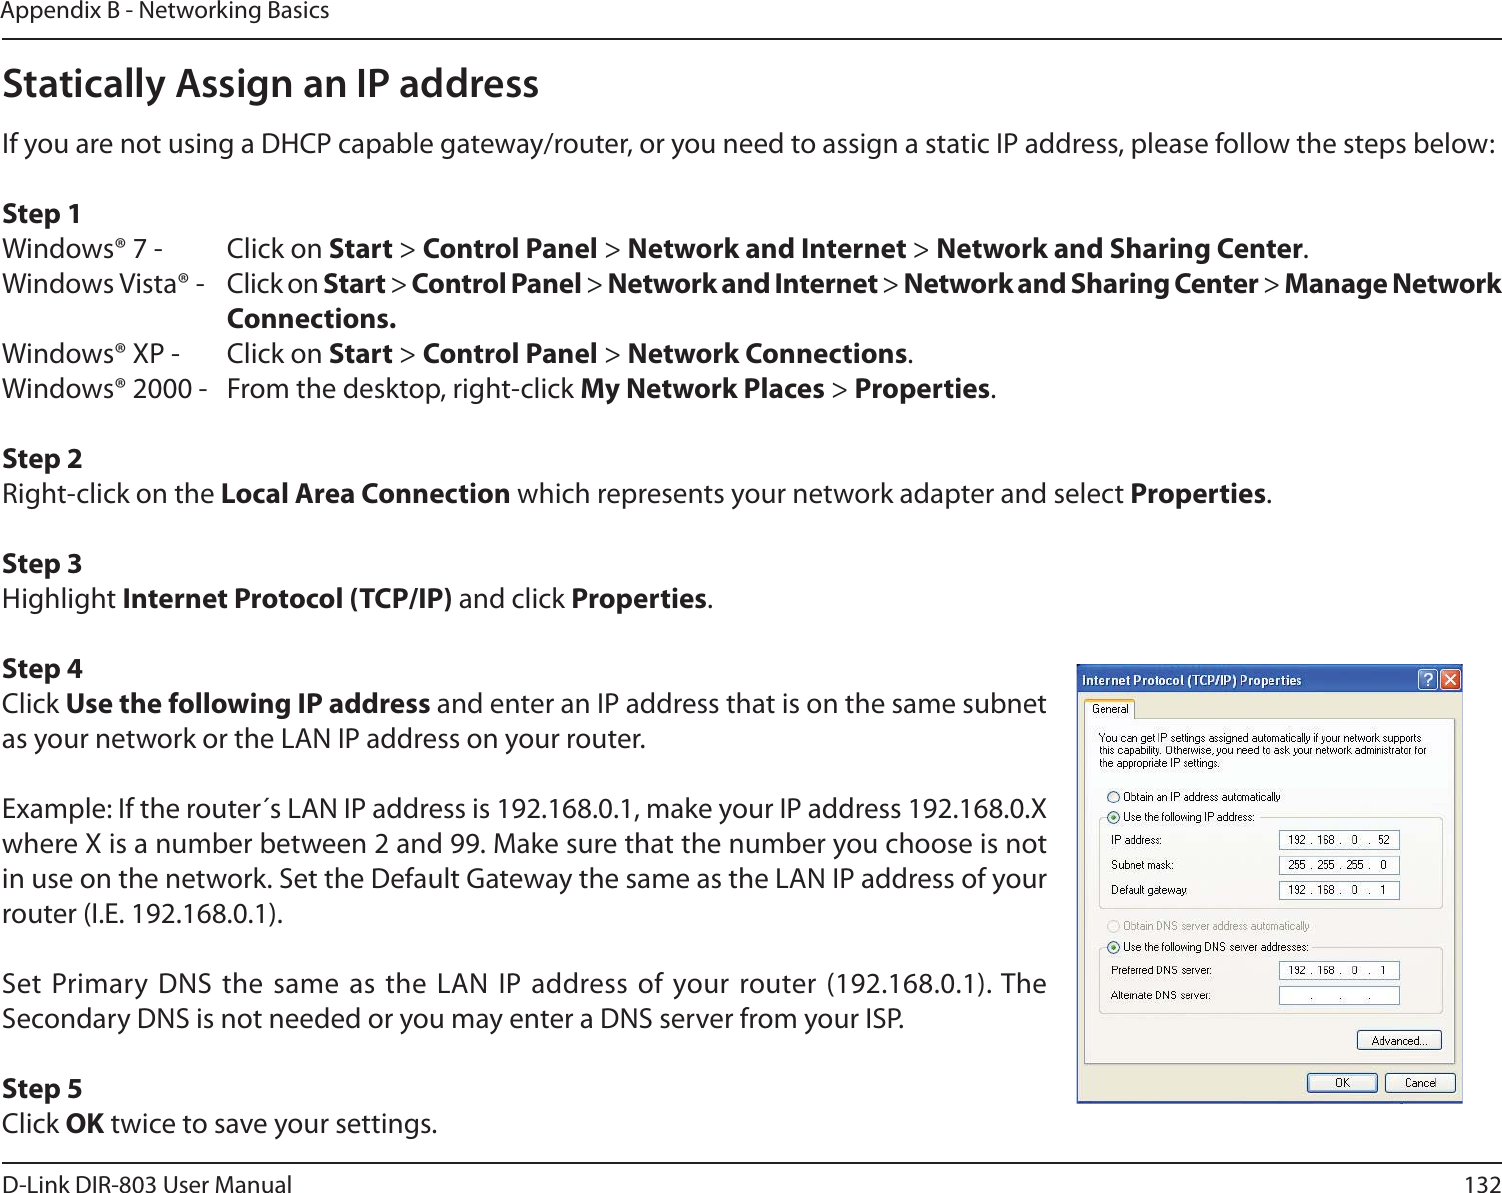 132D-Link DIR-803 User ManualAppendix B - Networking BasicsStatically Assign an IP addressIf you are not using a DHCP capable gateway/router, or you need to assign a static IP address, please follow the steps below:Step 1Windows® 7 -  Click on Start &gt; Control Panel &gt; Network and Internet &gt; Network and Sharing Center.Windows Vista® -  Click on Start &gt; Control Panel &gt; Network and Internet &gt; Network and Sharing Center &gt; Manage Network     Connections.Windows® XP -  Click on Start &gt; Control Panel &gt; Network Connections.Windows® 2000 -  From the desktop, right-click My Network Places &gt; Properties.Step 2Right-click on the Local Area Connection which represents your network adapter and select Properties.Step 3Highlight Internet Protocol (TCP/IP) and click Properties.Step 4Click Use the following IP address and enter an IP address that is on the same subnet as your network or the LAN IP address on your router. Example: If the router´s LAN IP address is 192.168.0.1, make your IP address 192.168.0.X where X is a number between 2 and 99. Make sure that the number you choose is not in use on the network. Set the Default Gateway the same as the LAN IP address of your router (I.E. 192.168.0.1). Set Primary DNS the same as the LAN IP address of your router (192.168.0.1). The Secondary DNS is not needed or you may enter a DNS server from your ISP.Step 5Click OK twice to save your settings.